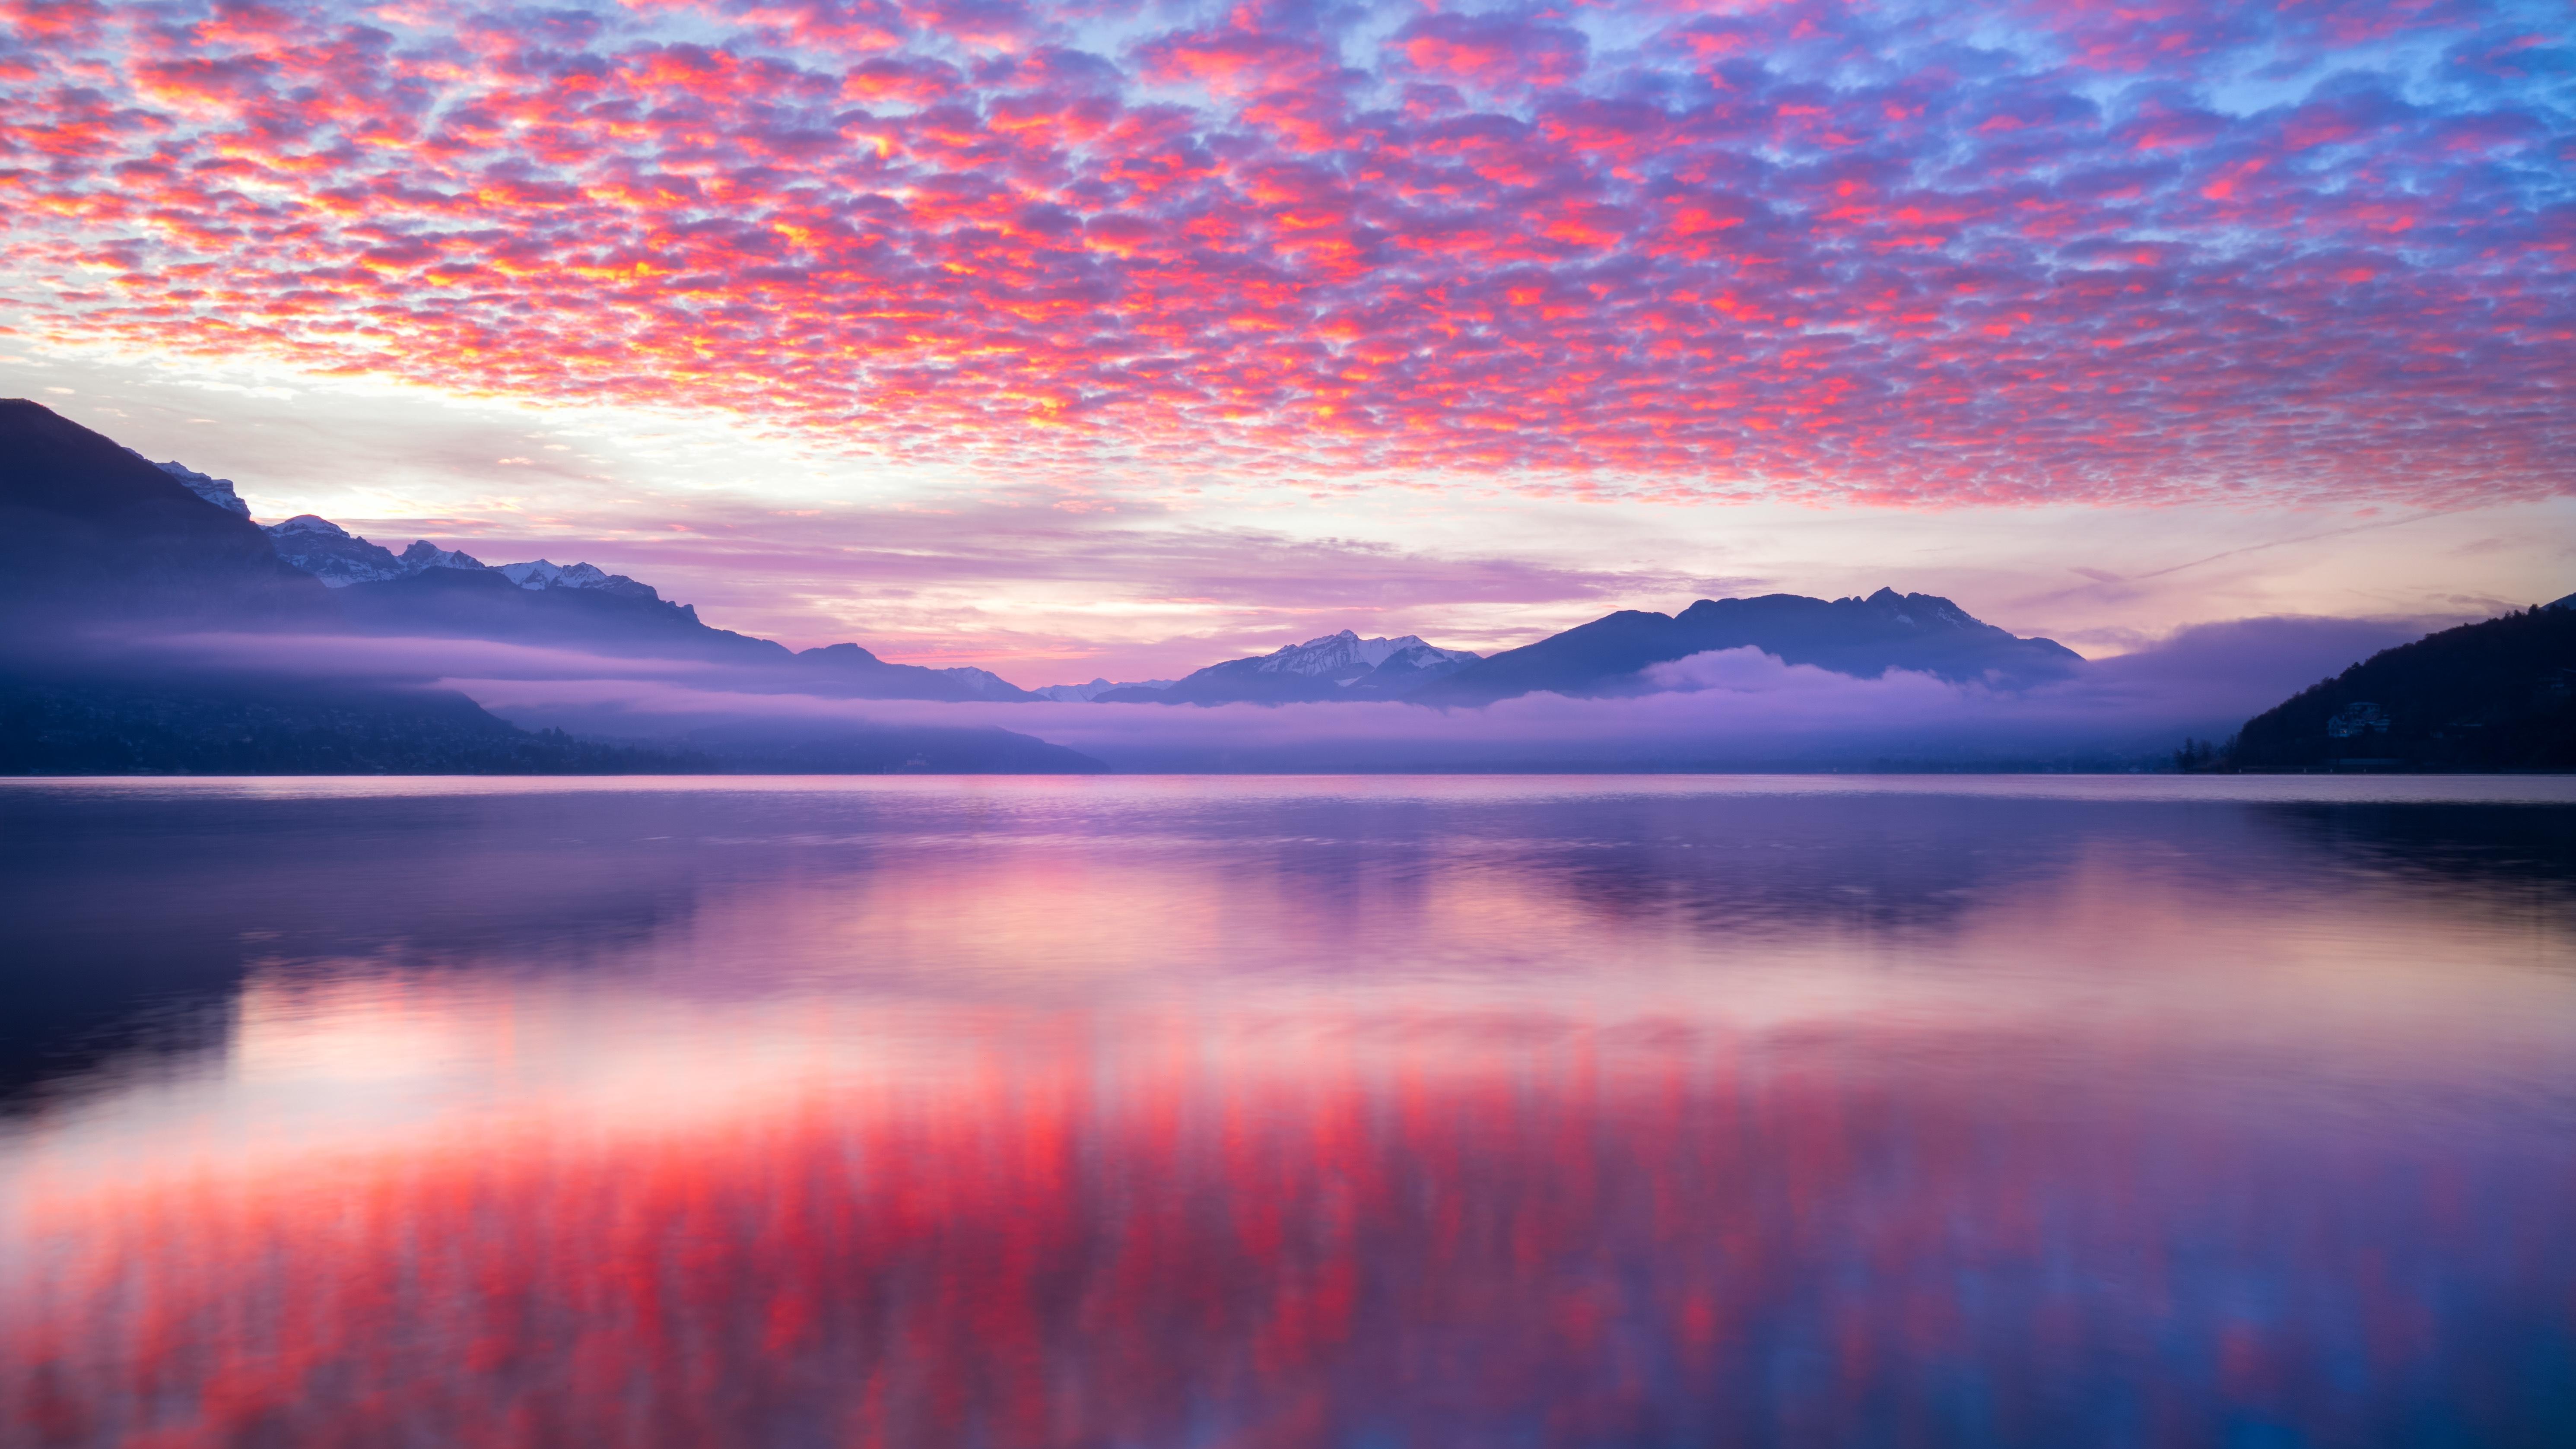 Download 5963x3354 Lake, Sunset, Pretty Sky, Scenic, Mountains, Reflection Wallpaper